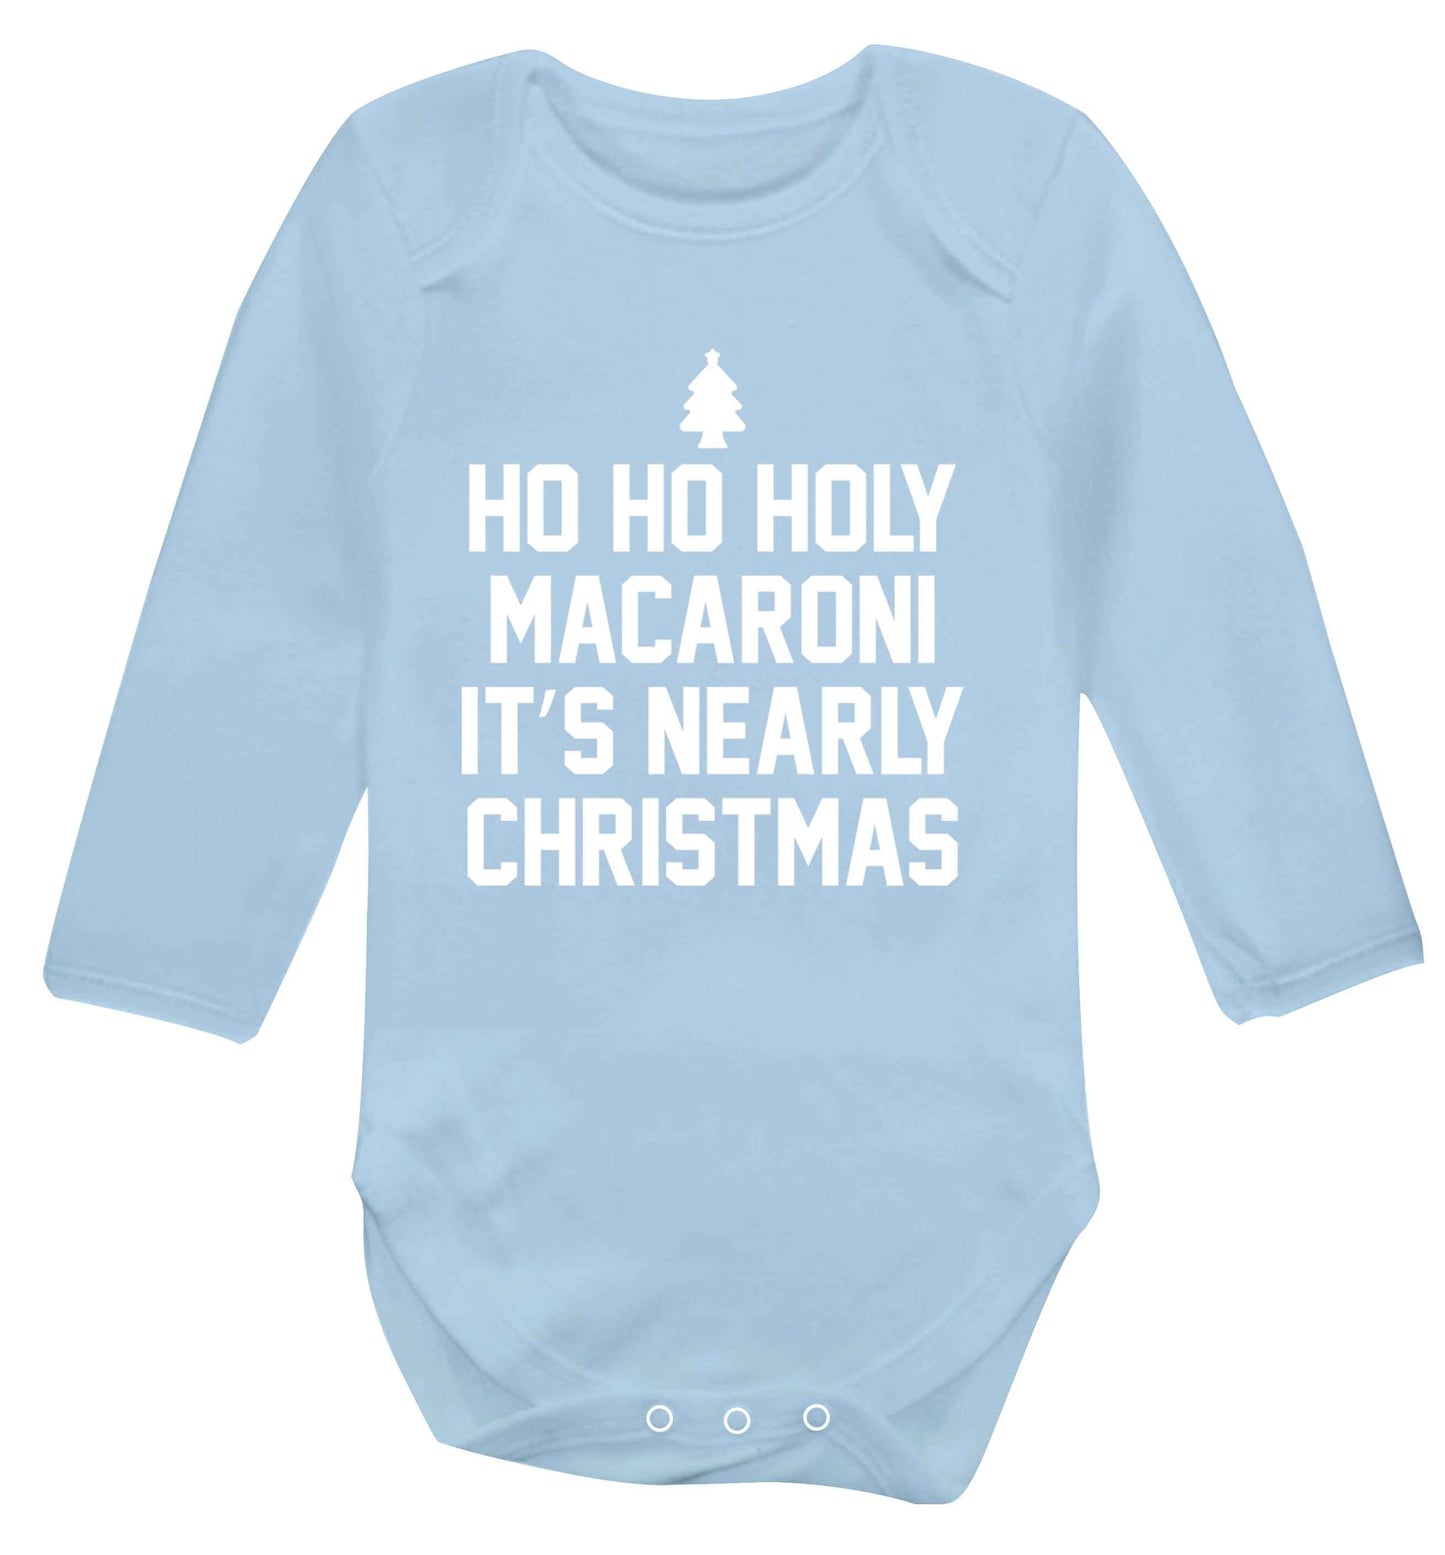 Ho ho holy macaroni it's nearly Christmas Baby Vest long sleeved pale blue 6-12 months